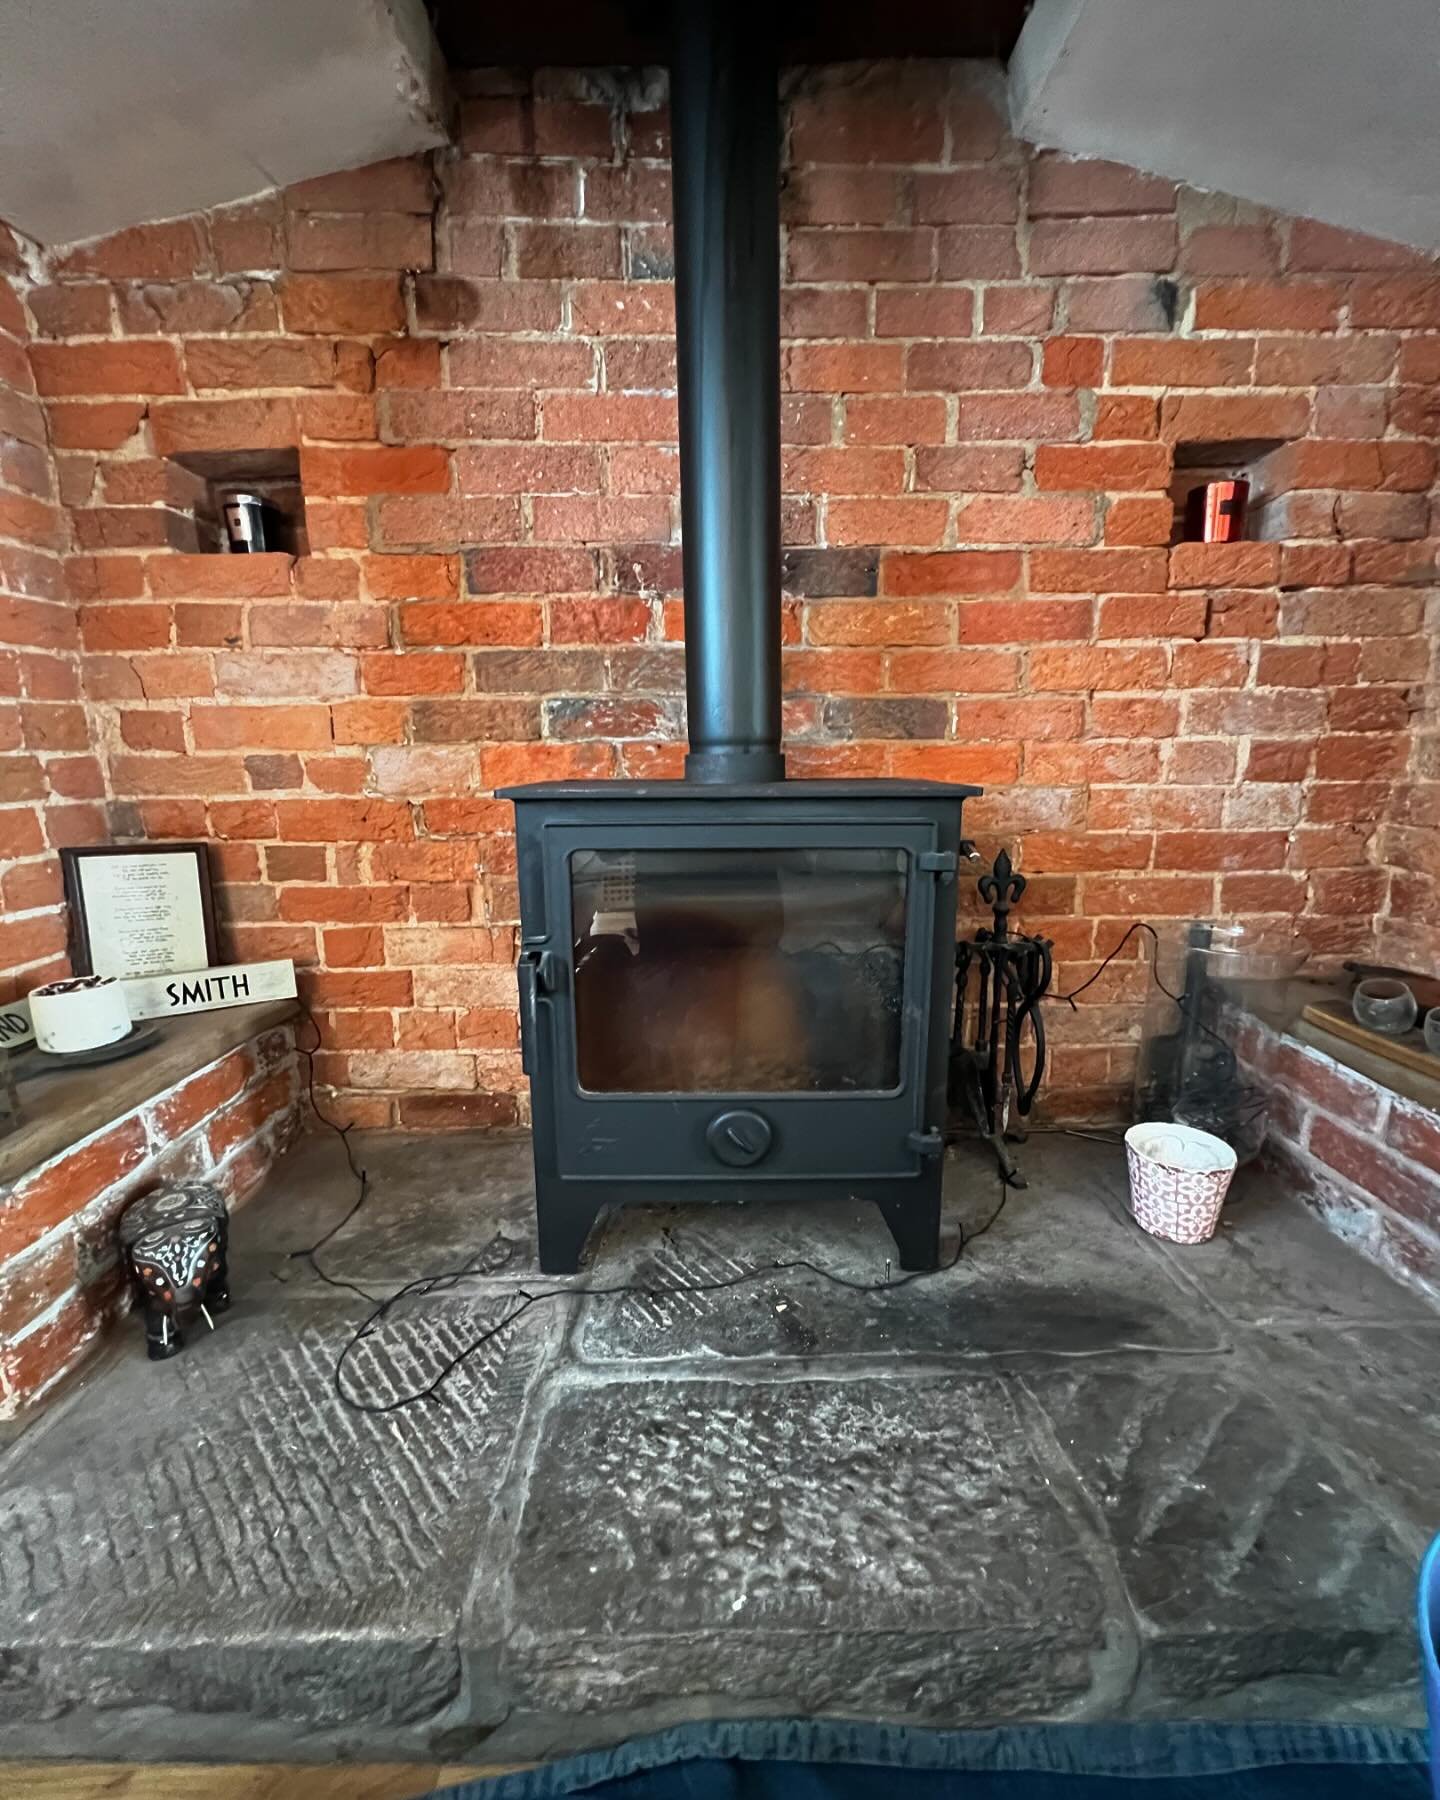 Saturday shift starts with this wood burner set in this stunning fire place. 

Quite often the thought is fitting a stove takes away the beauty of a fire place but more often than not it really bricks it back to life and transforms it into a beautifu